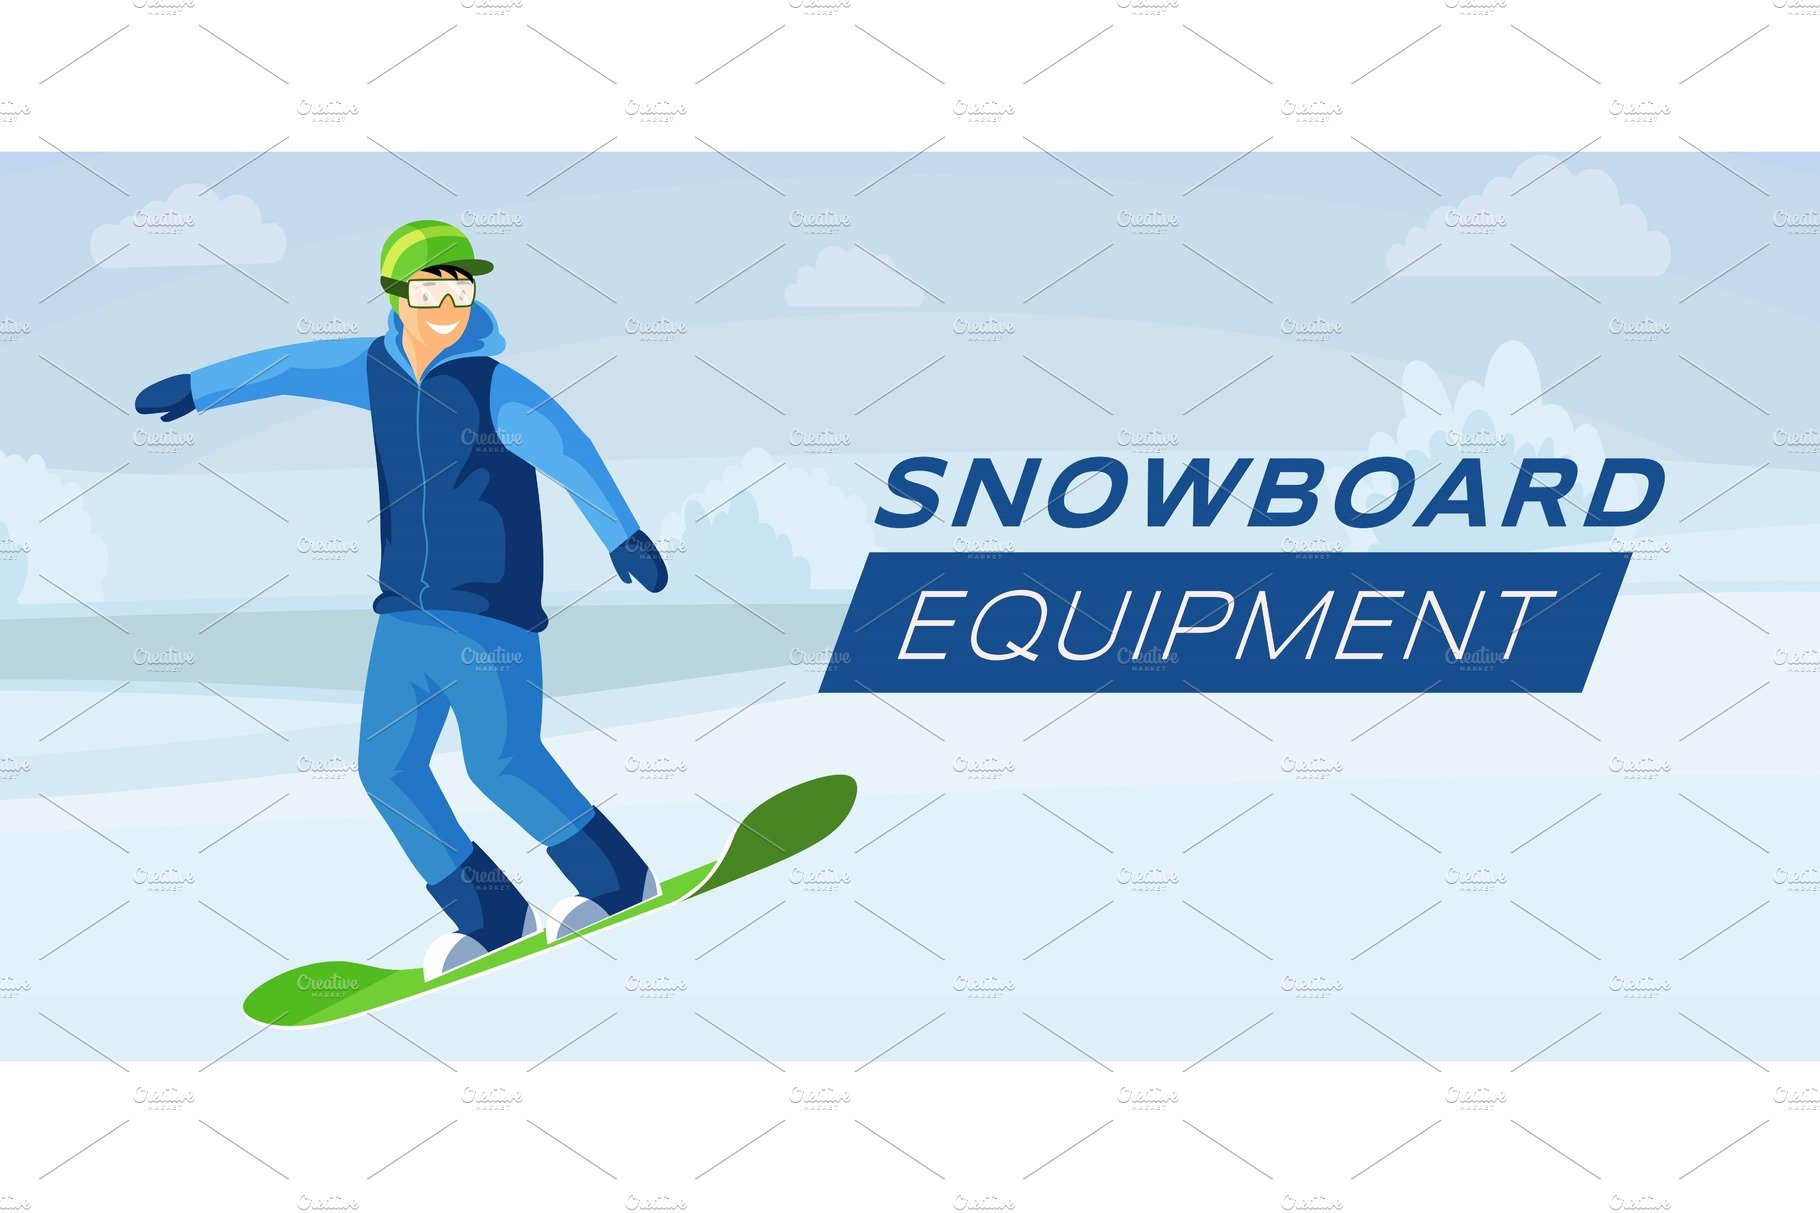 Snowboard equipment flat color cover image.